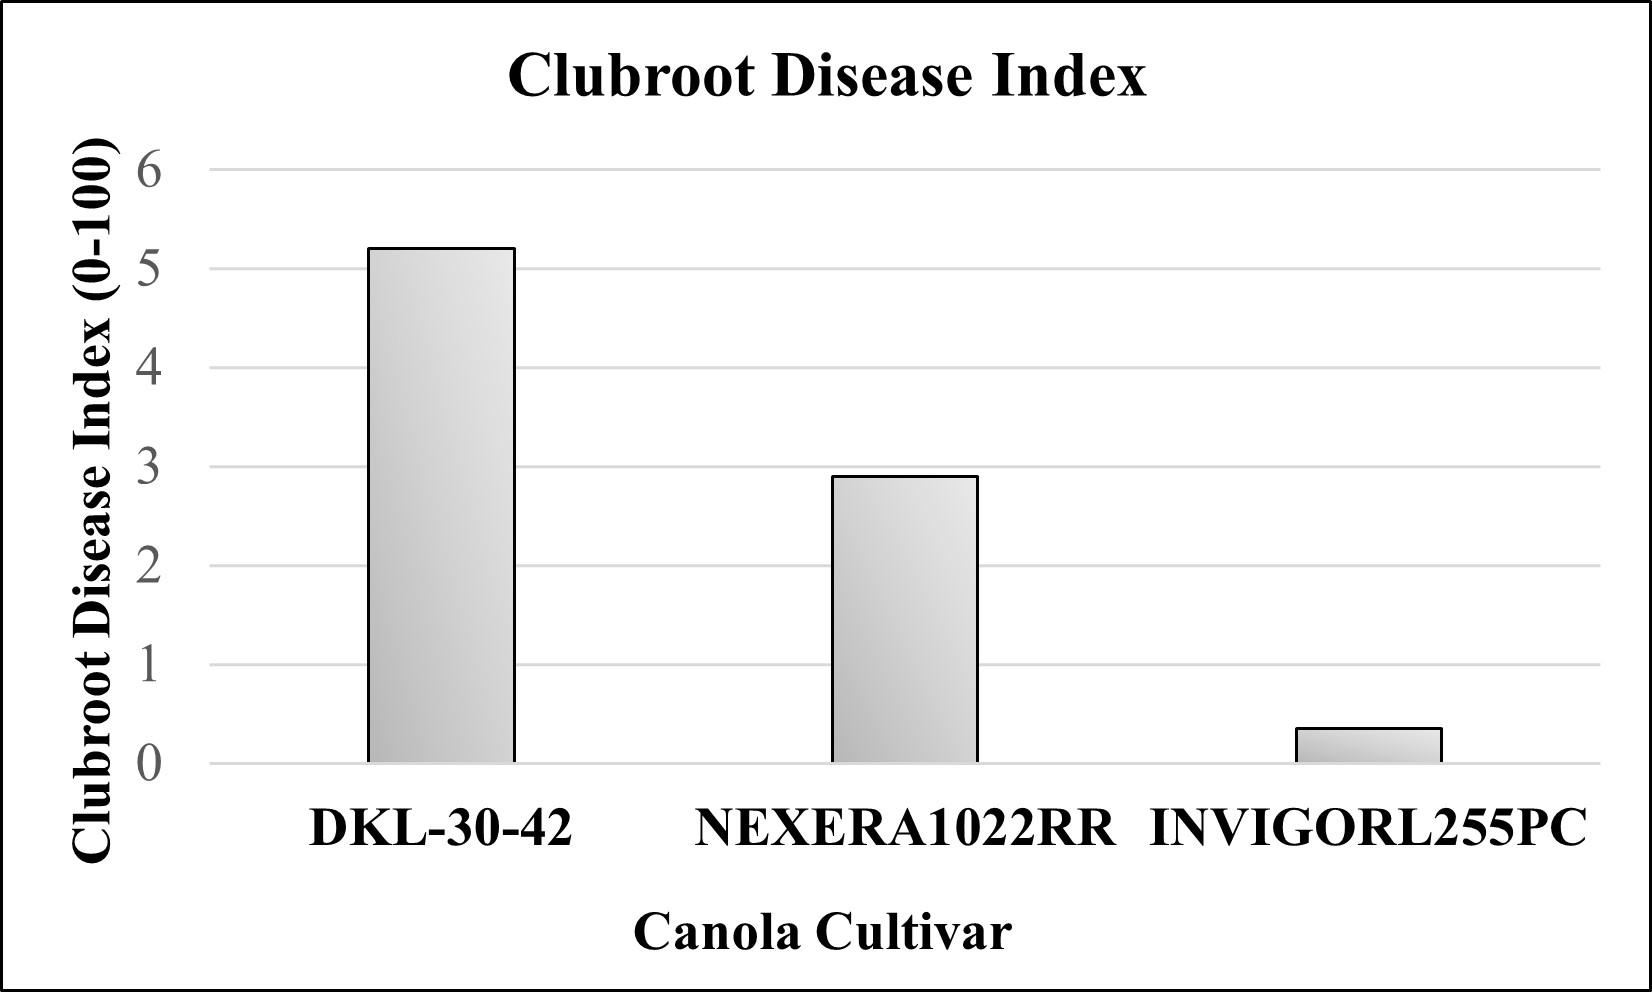 Clubroot disease index observed on three varieties planted after five years of clubroot confirmation.